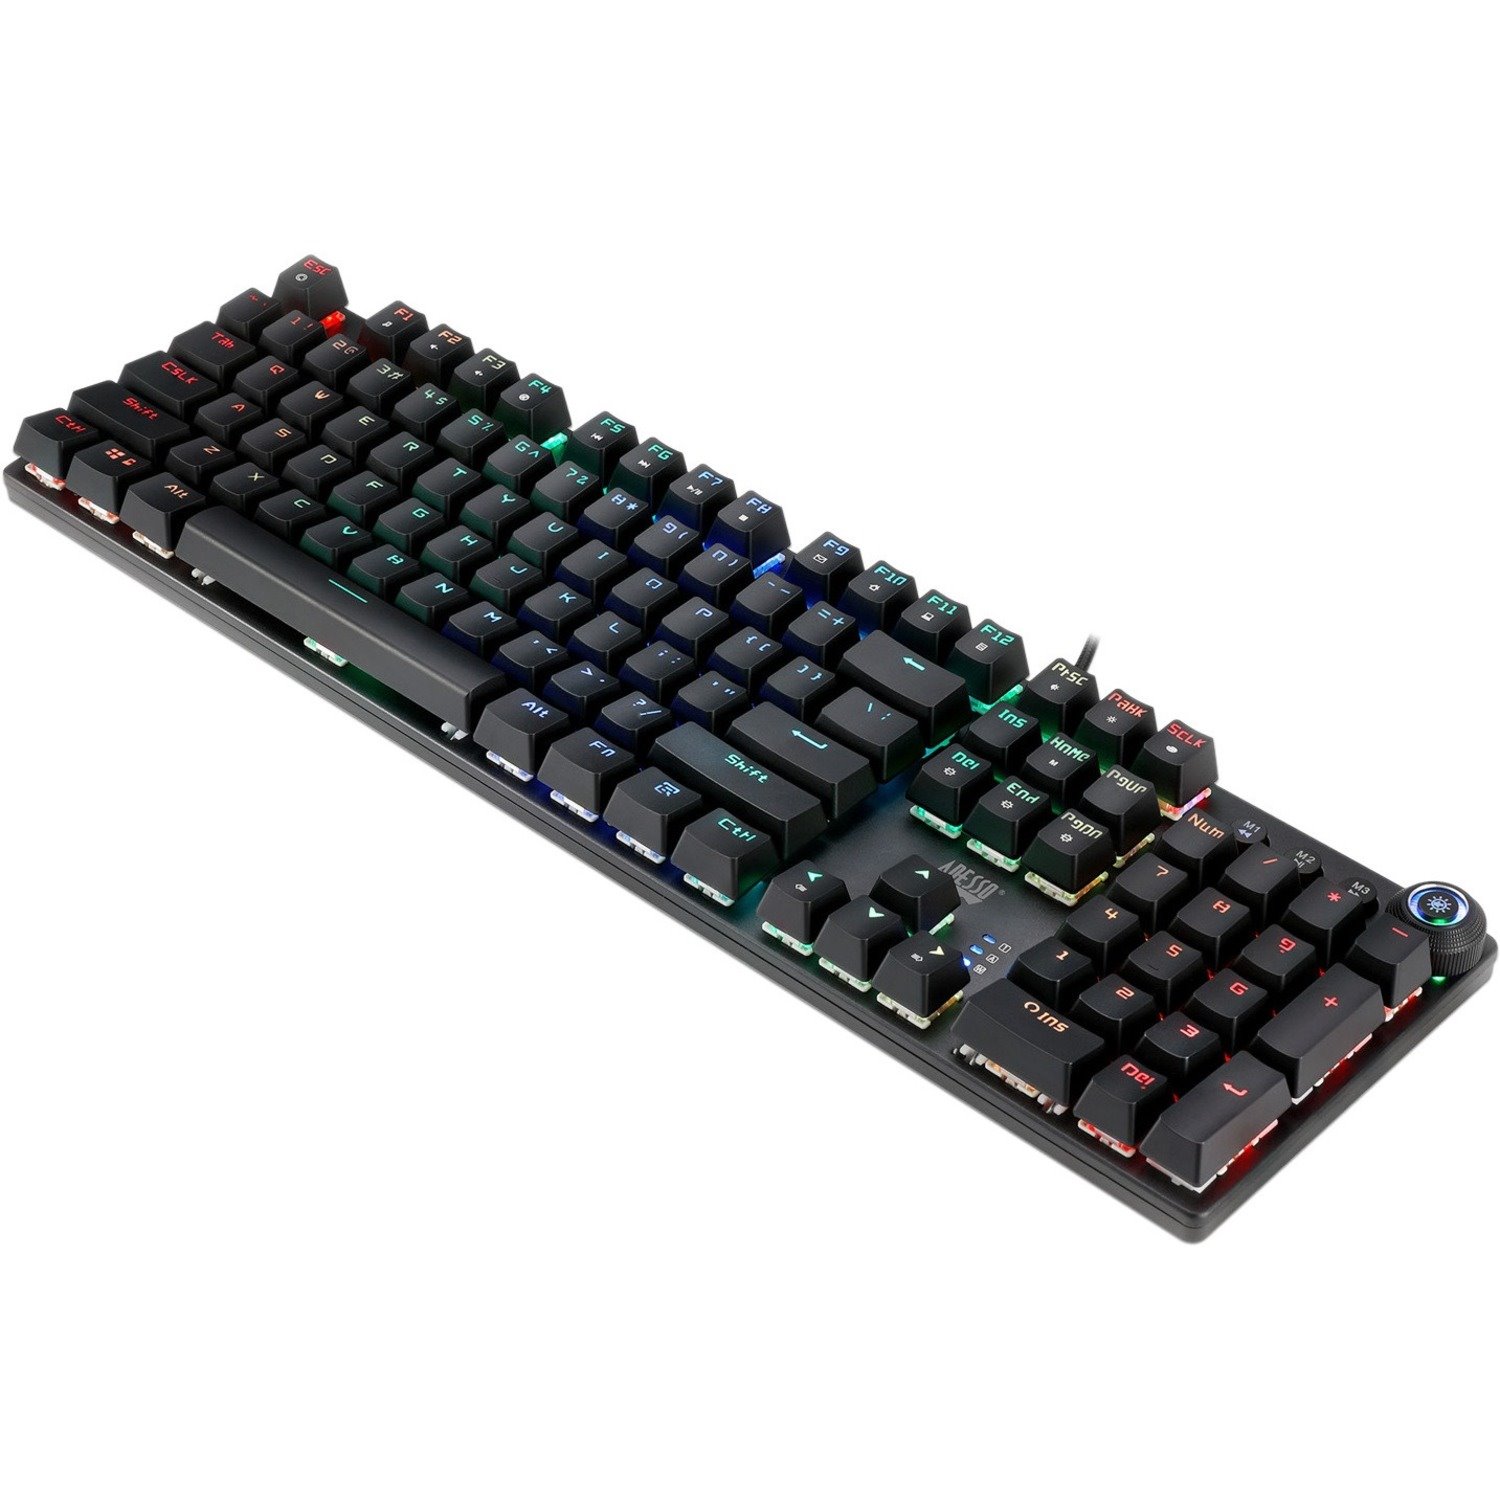 Adesso EasyTouch 650EB Gaming Keyboard - Cable Connectivity - USB Interface - RGB LED - English (US) - Black